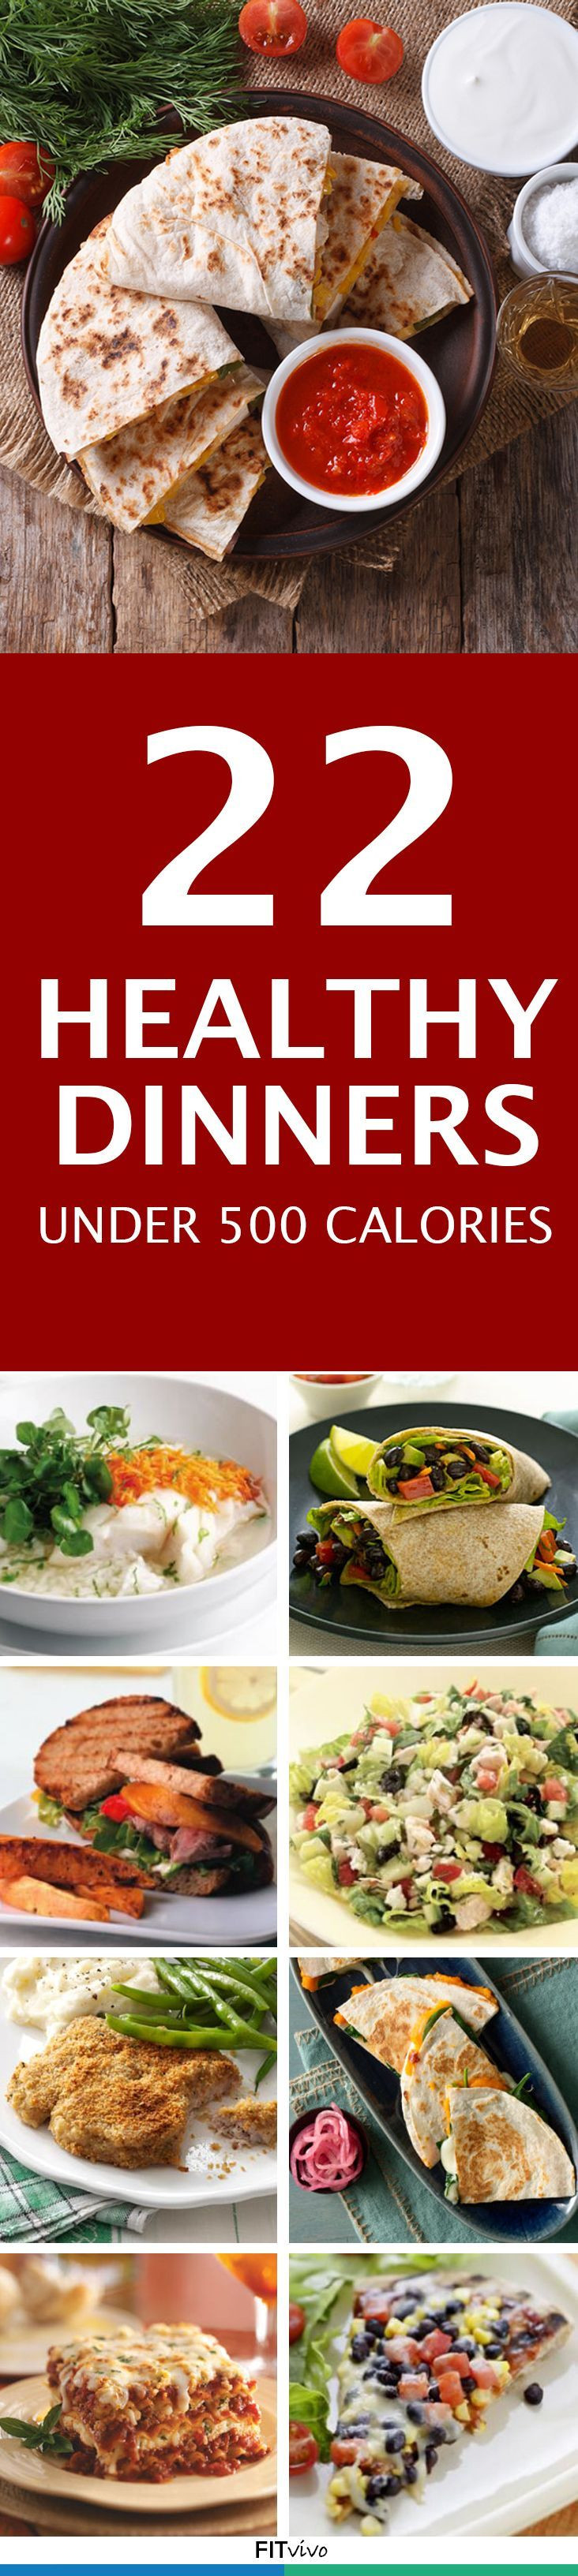 Low Calorie Dinners For Family
 Healthy Dinner Recipes 22 Meal Recipes Under 500